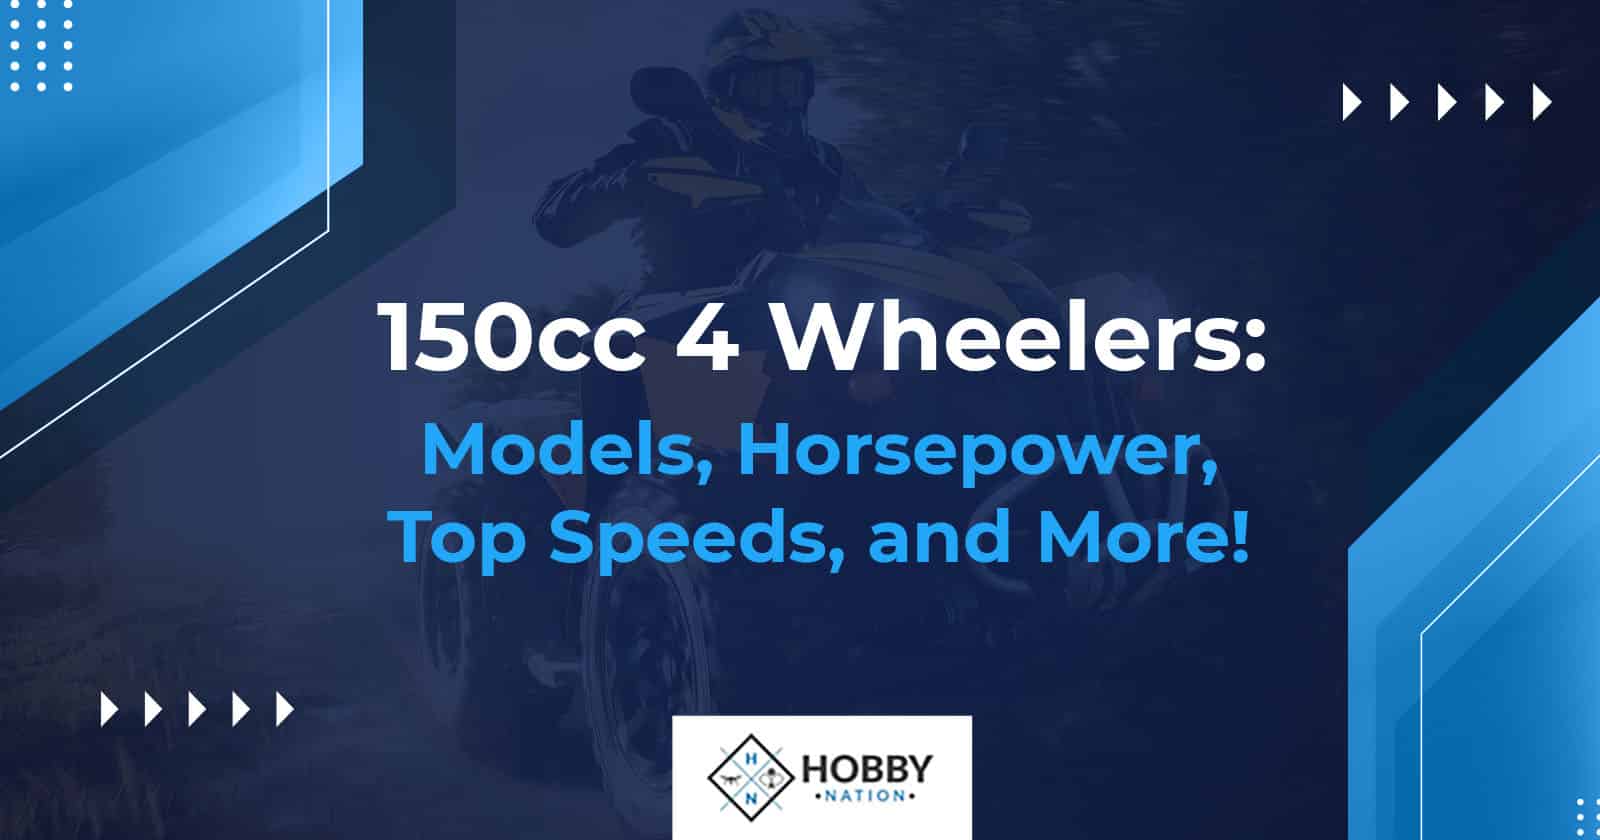 150cc 4 Wheelers: Models, Horsepower, Top Speeds, and More!